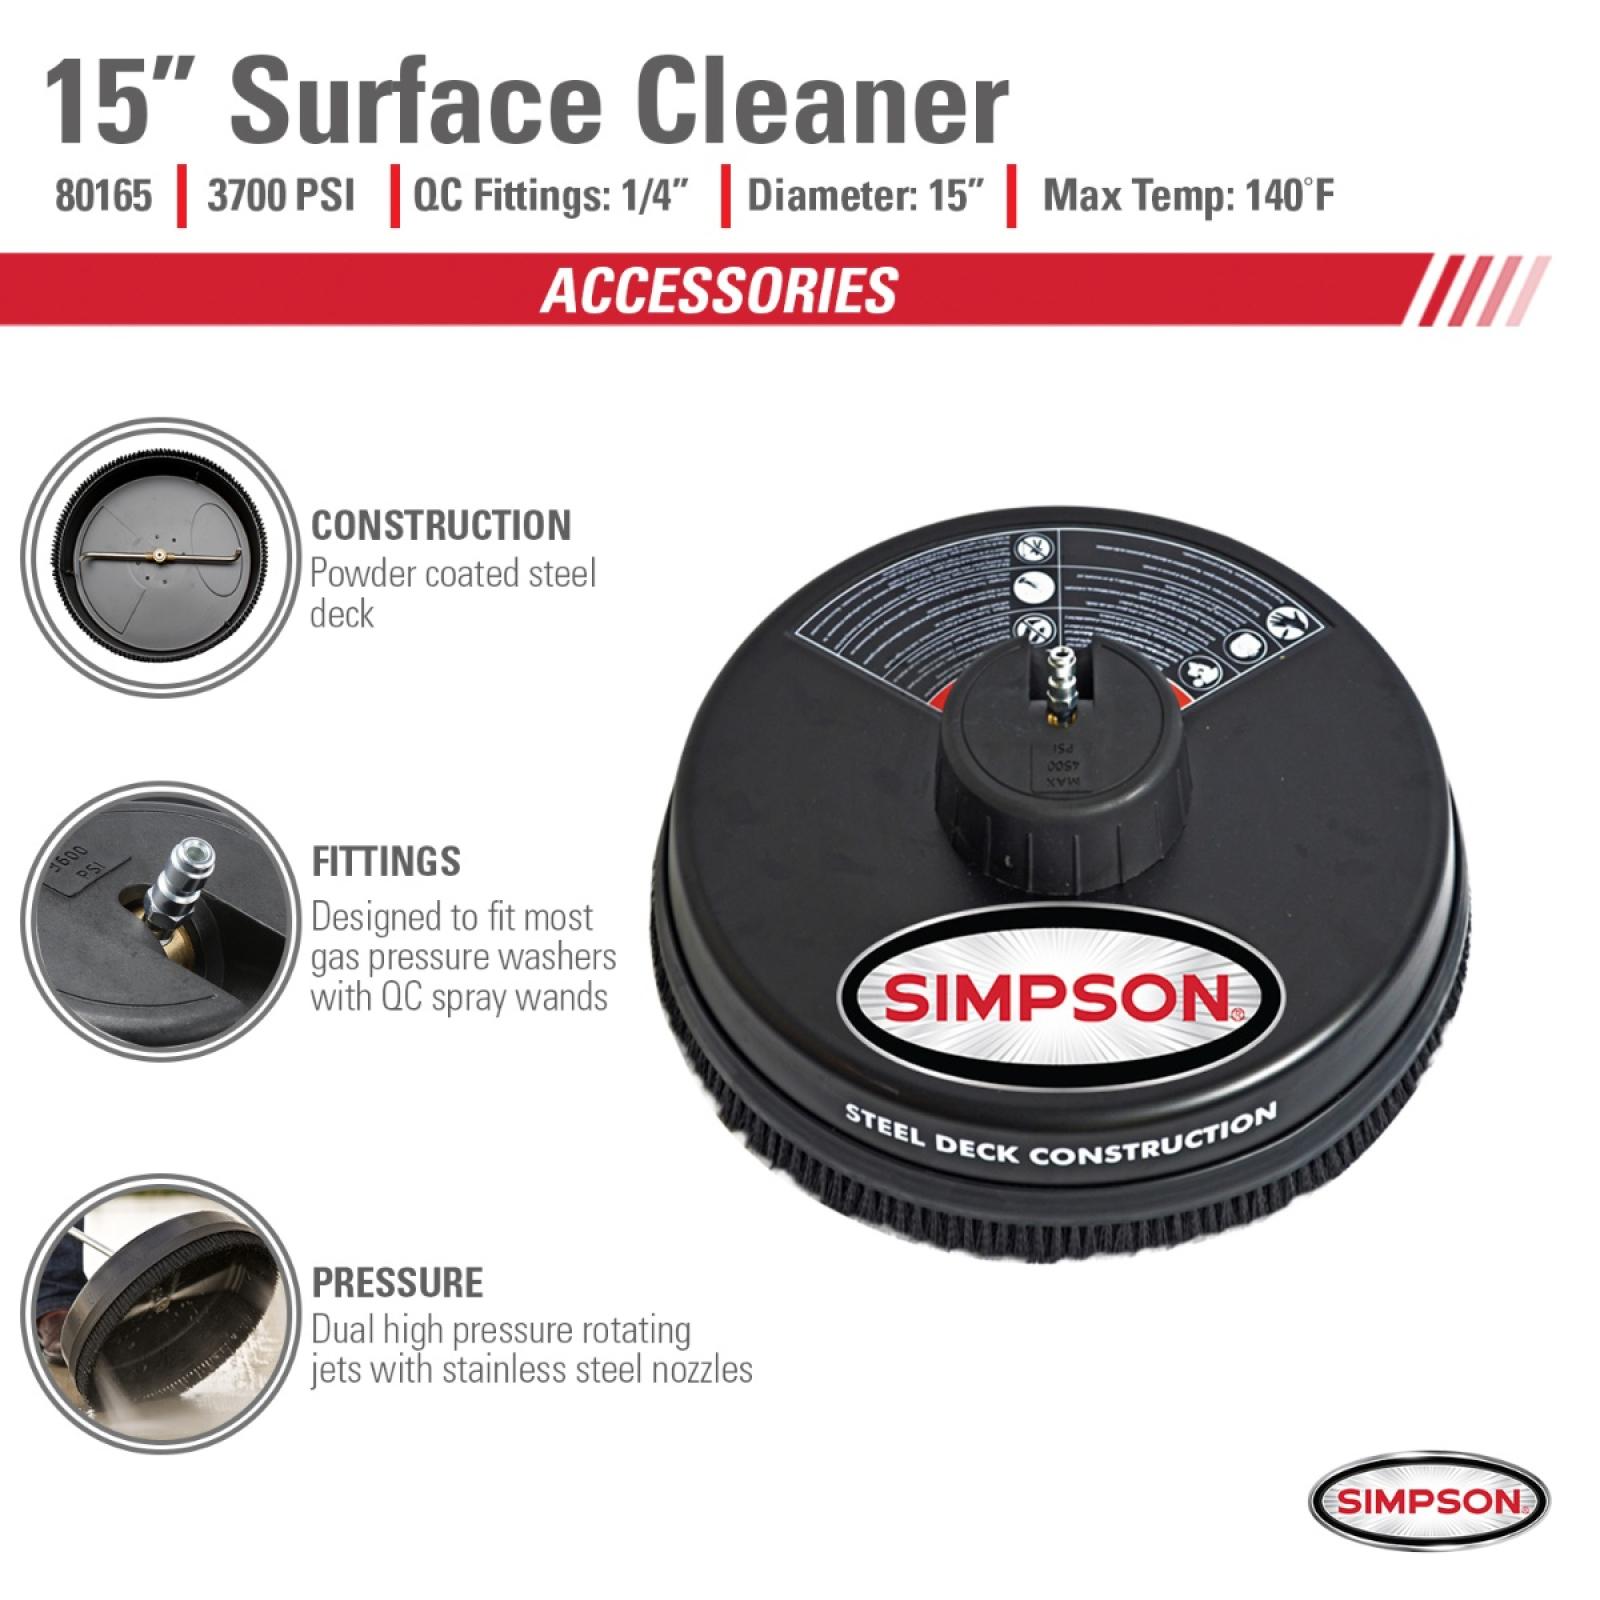 Simpson Pressure Washer Surface Cleaner